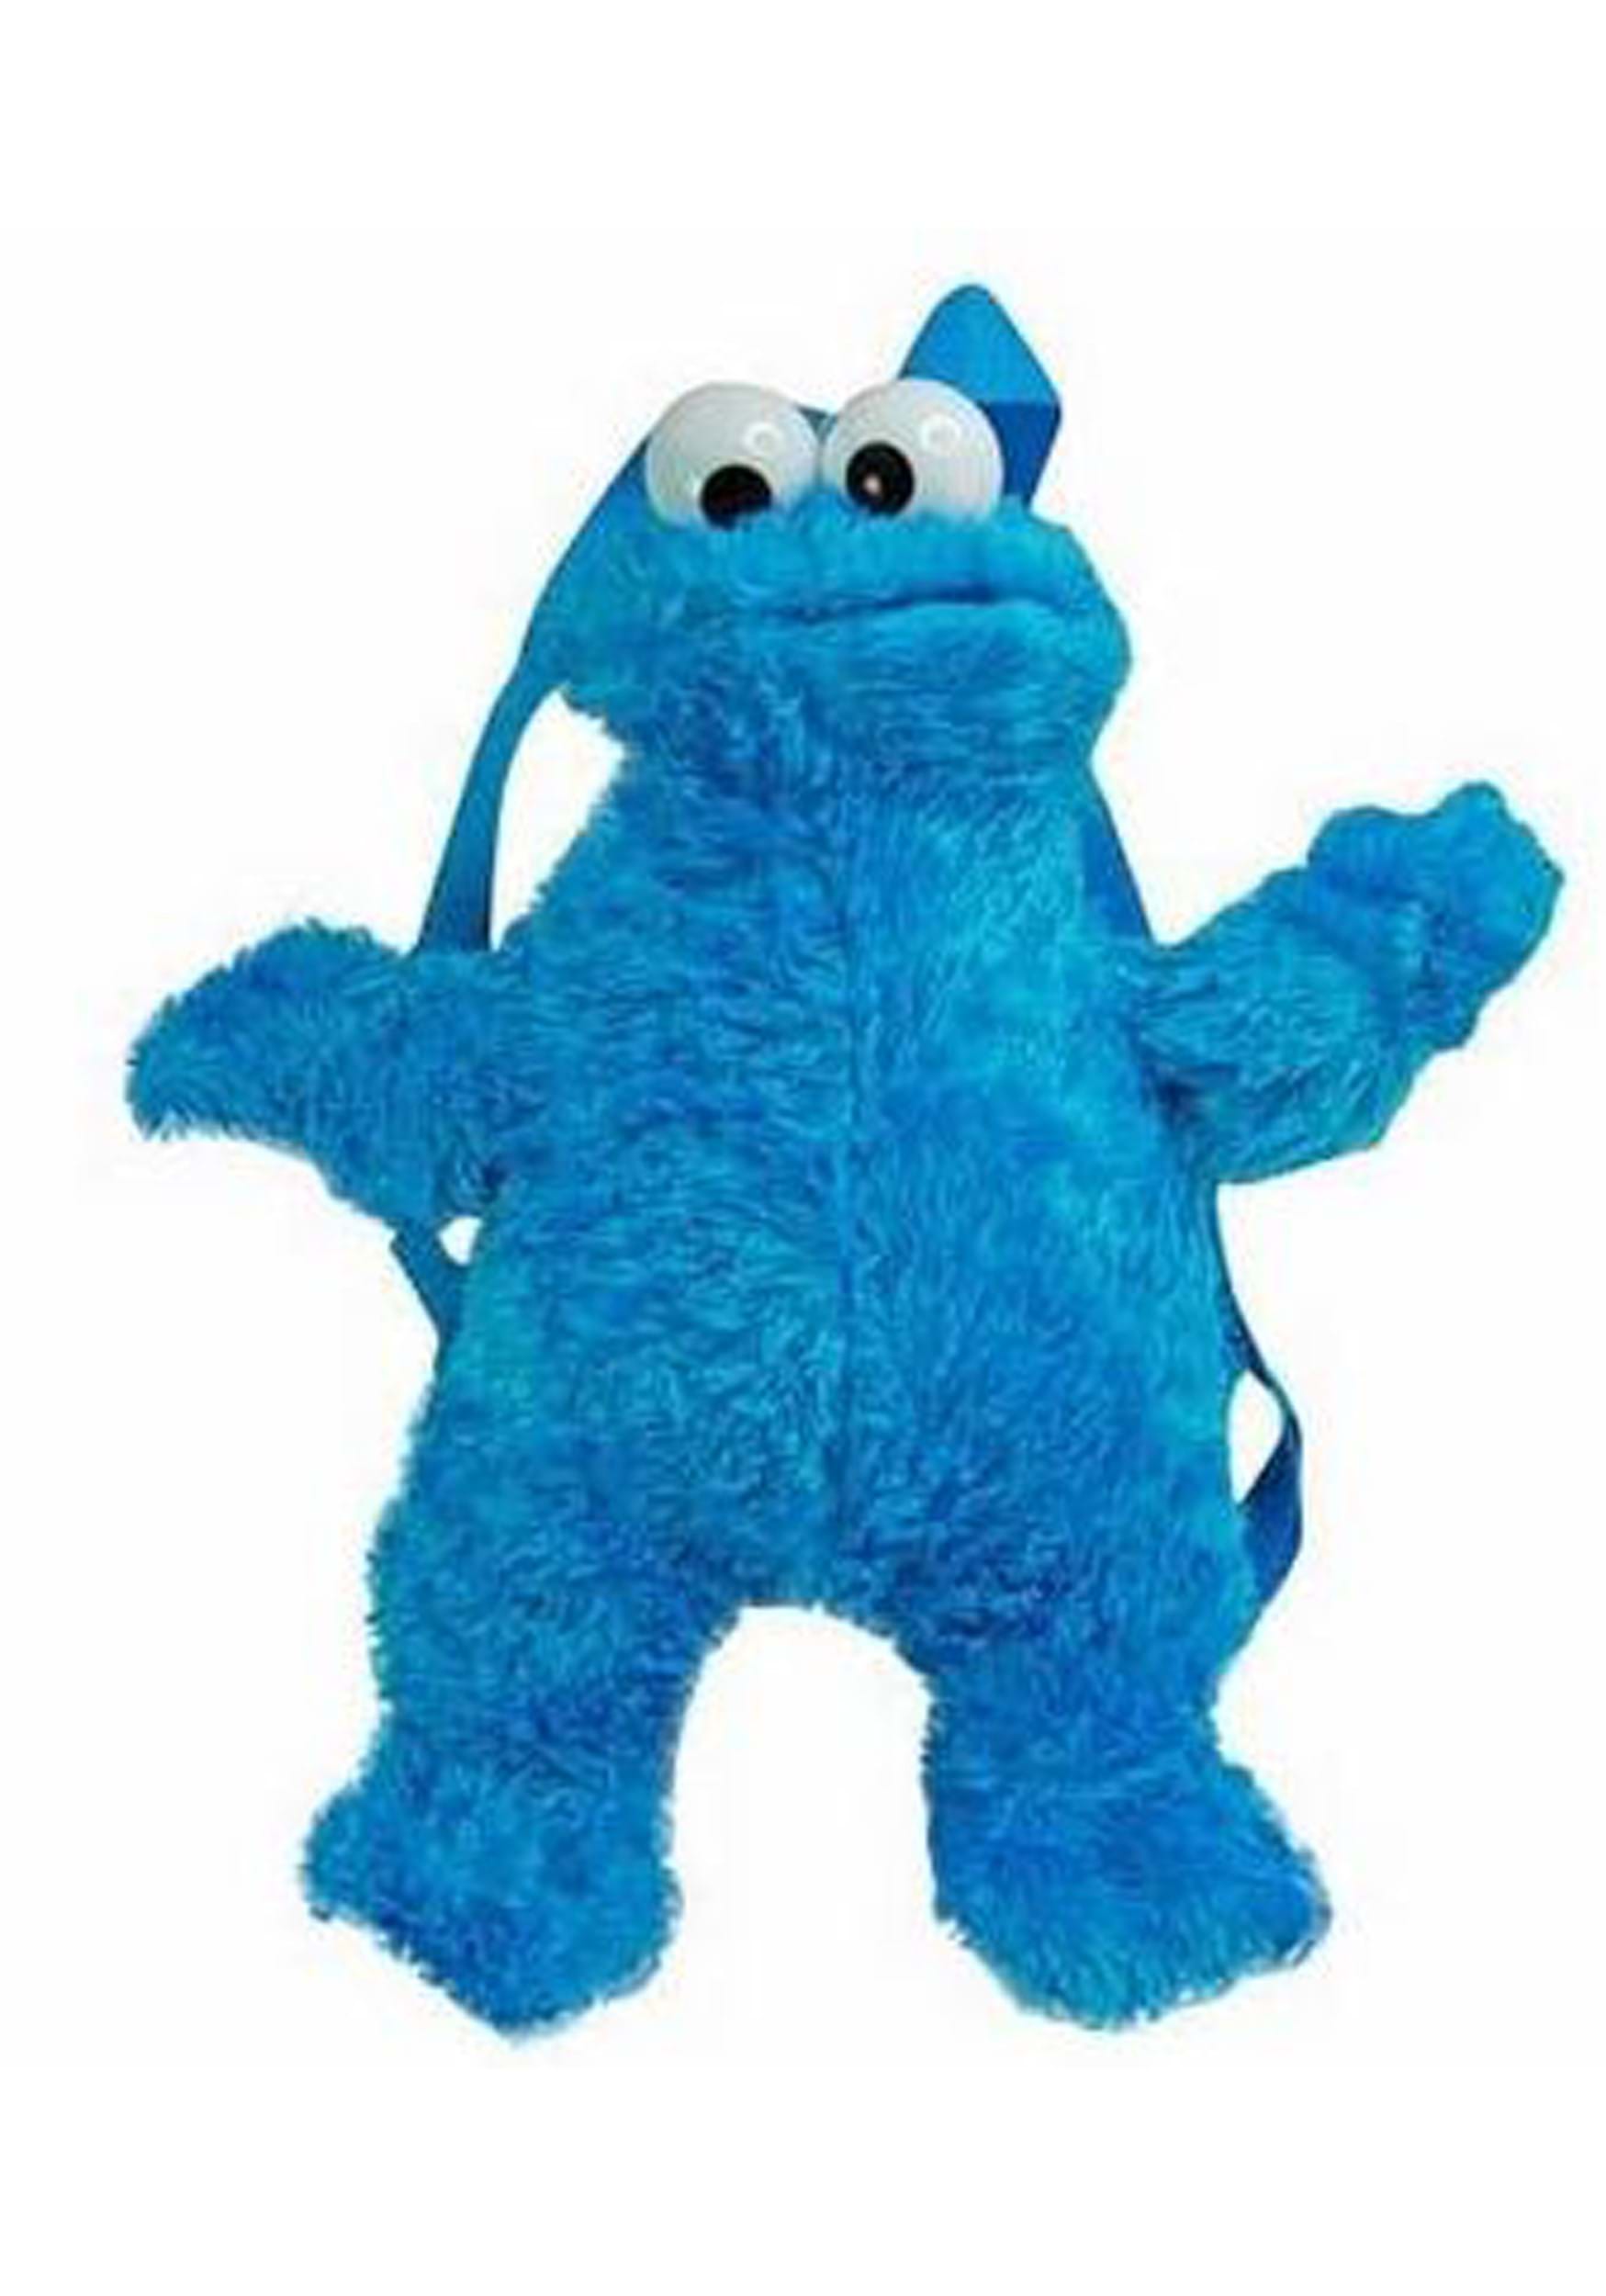 16 Cookie Monster Plush Backpack